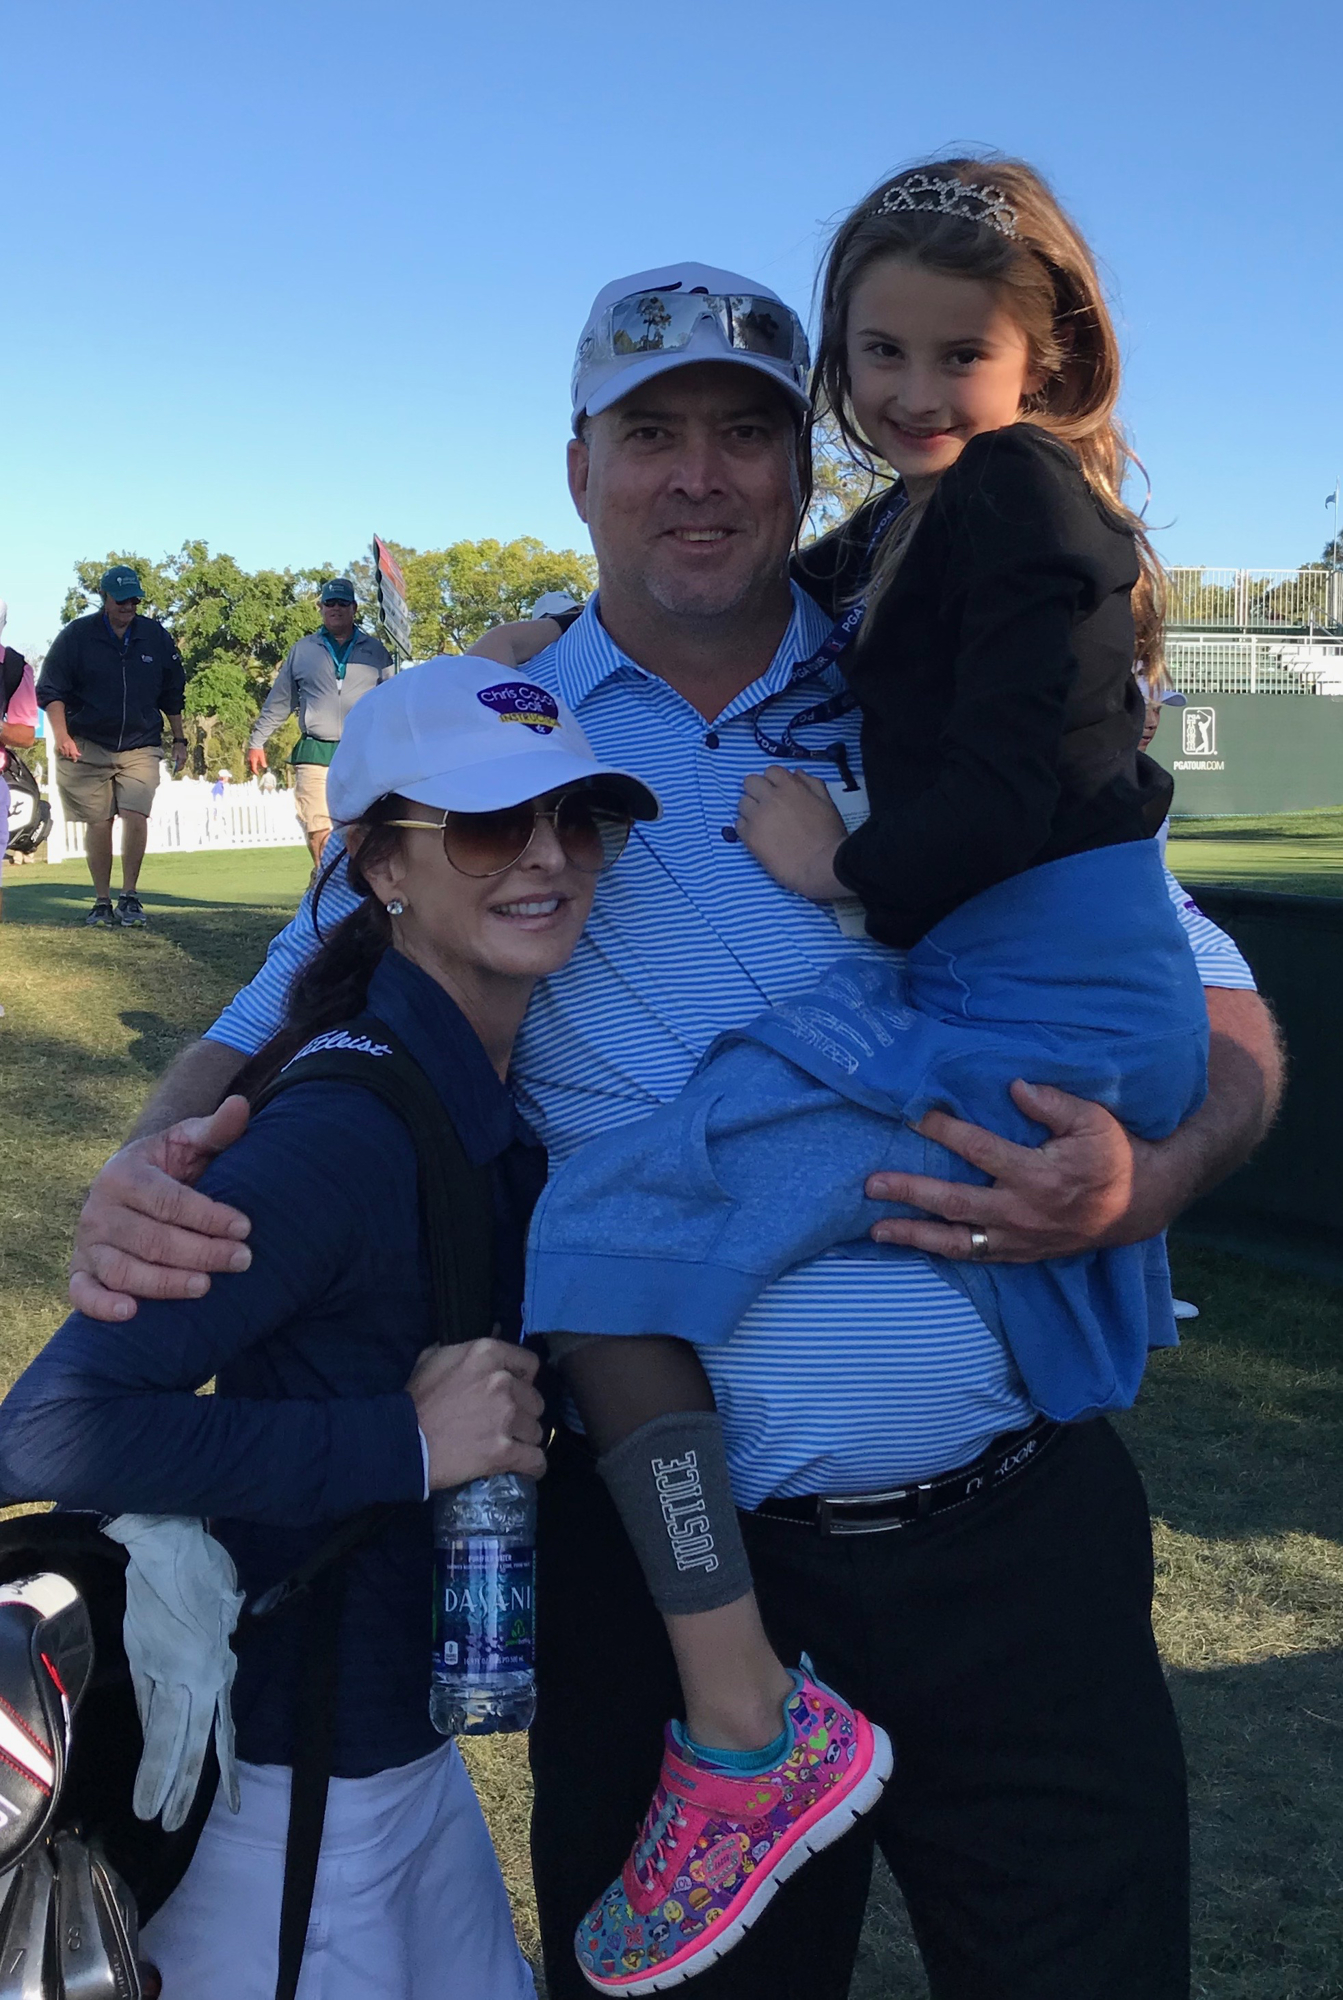 Chris Couch’s wife, Julia, and daughter, Cora, are always cheering him on.